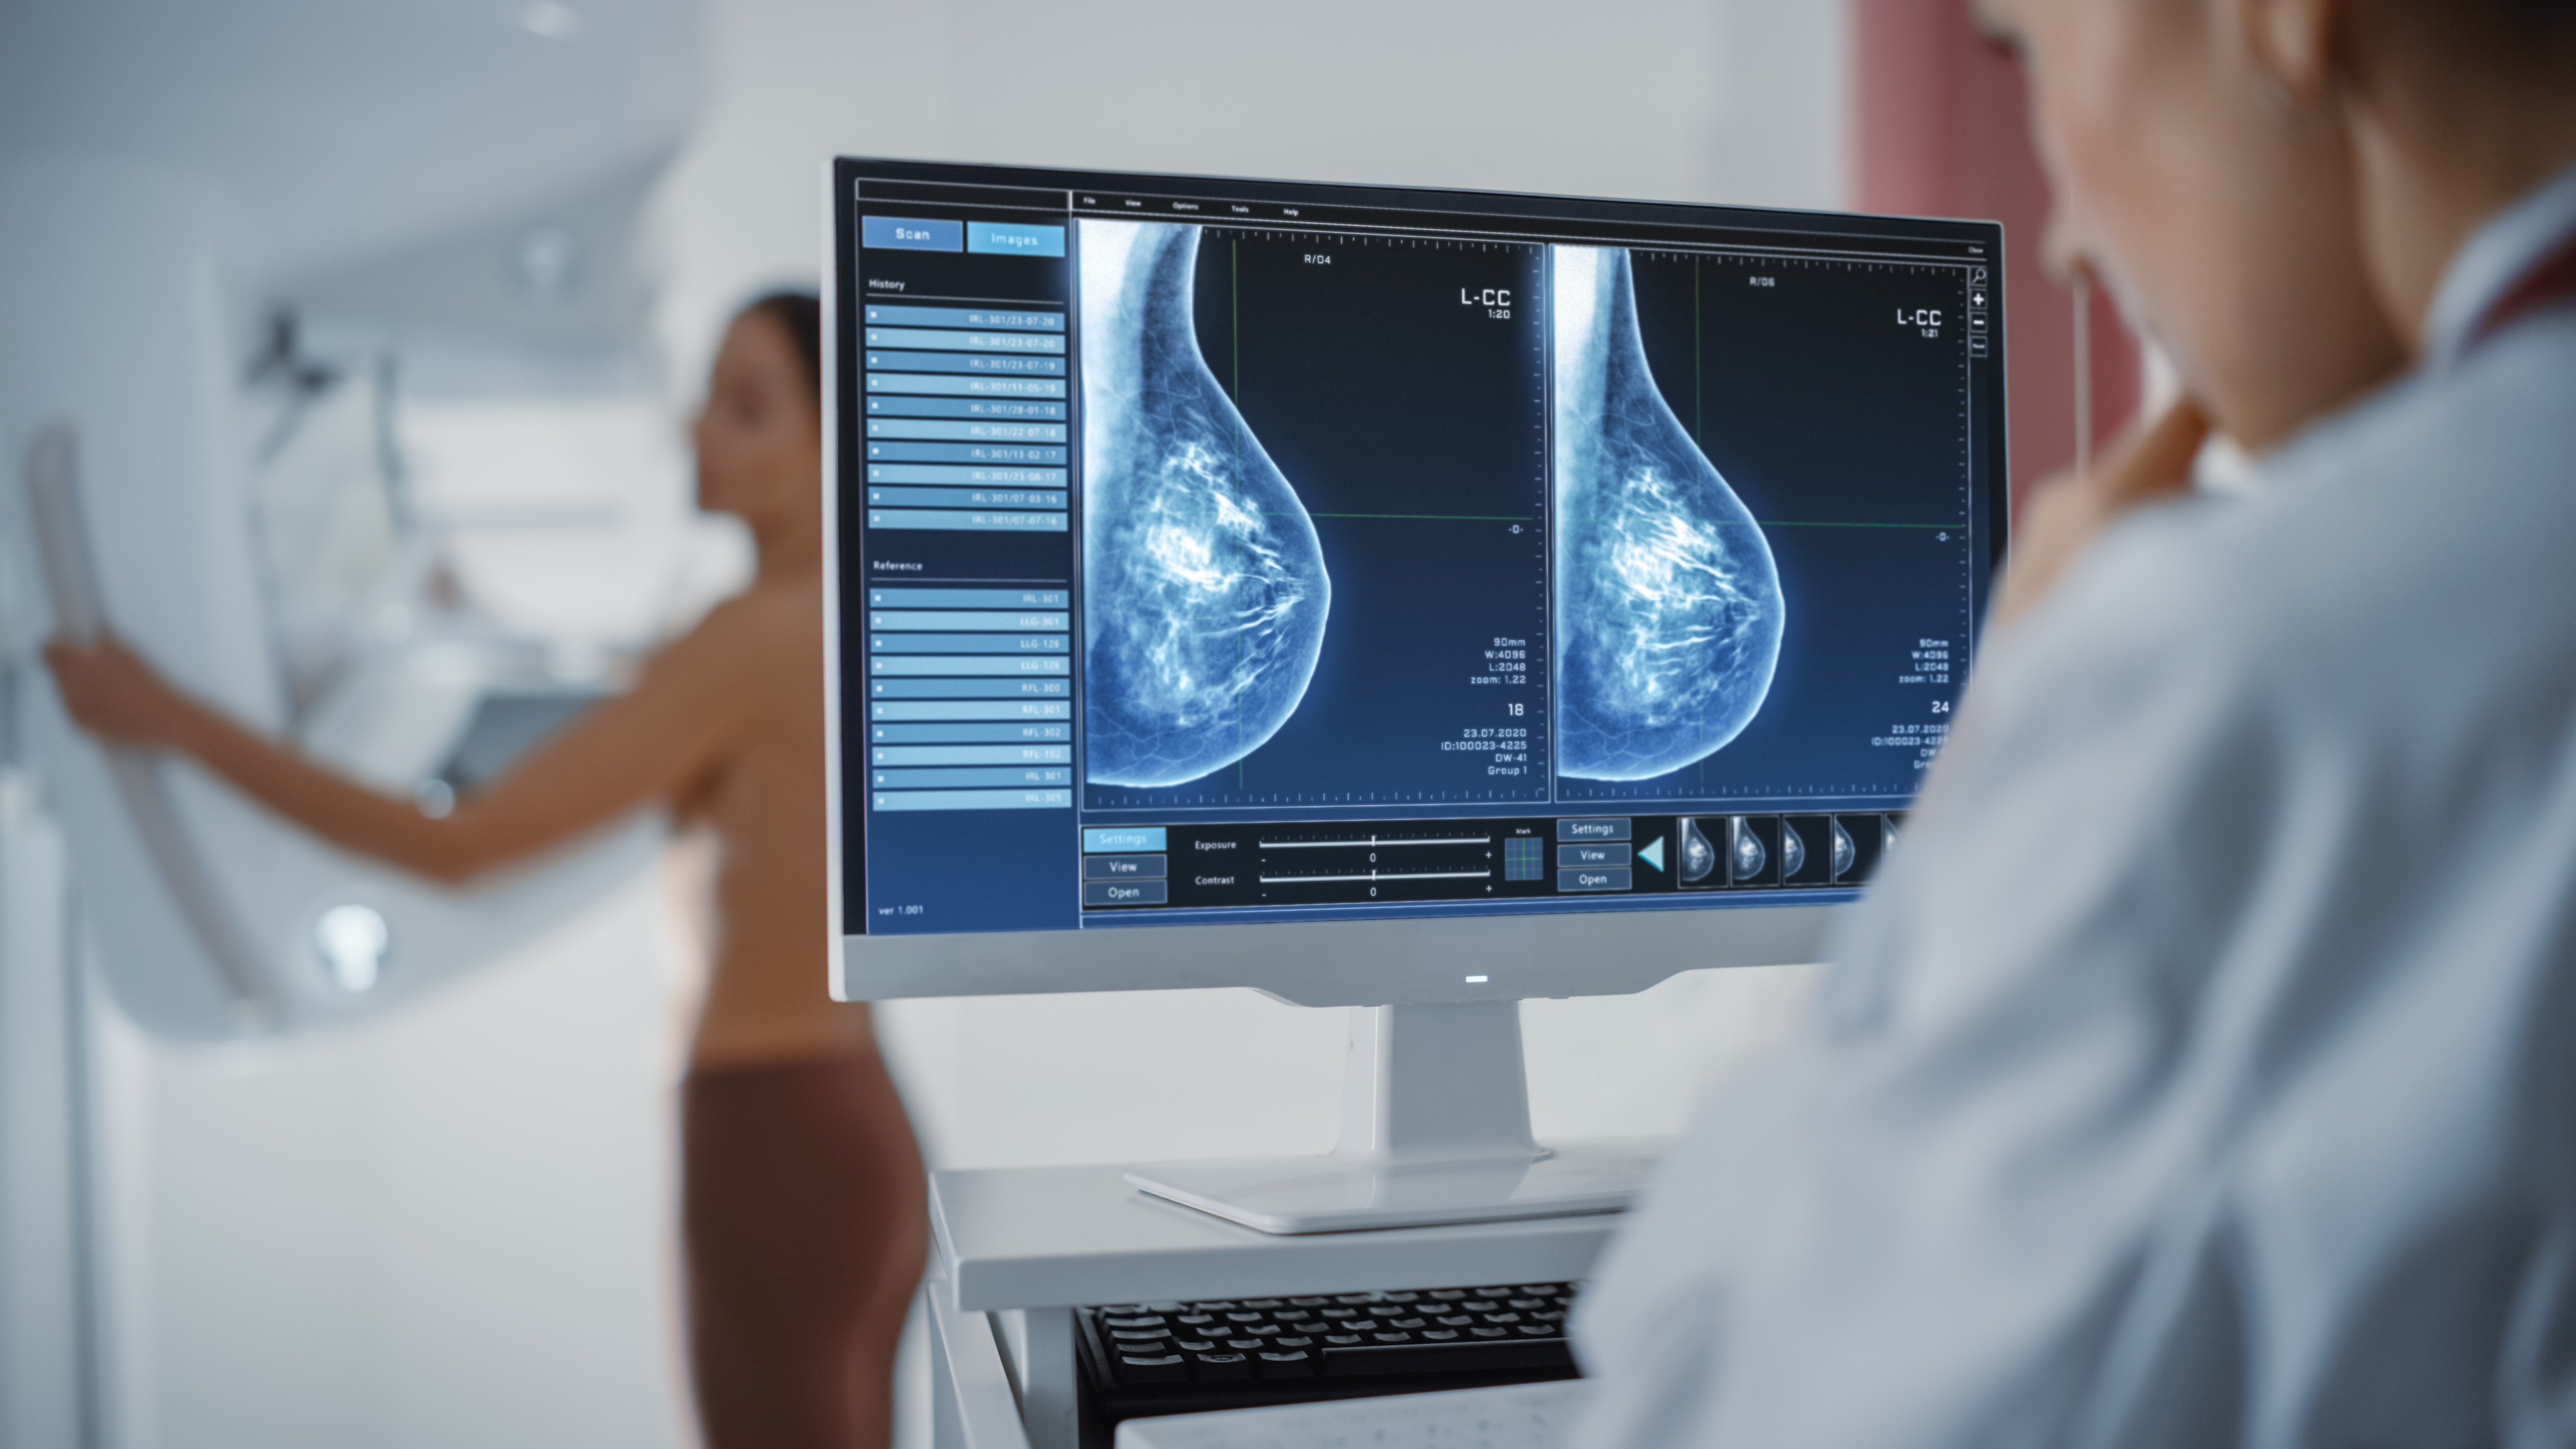 Mammography Study Shows 22 Percent Higher Incidence of Dense Breasts in Women with a Family History of Breast Cancer